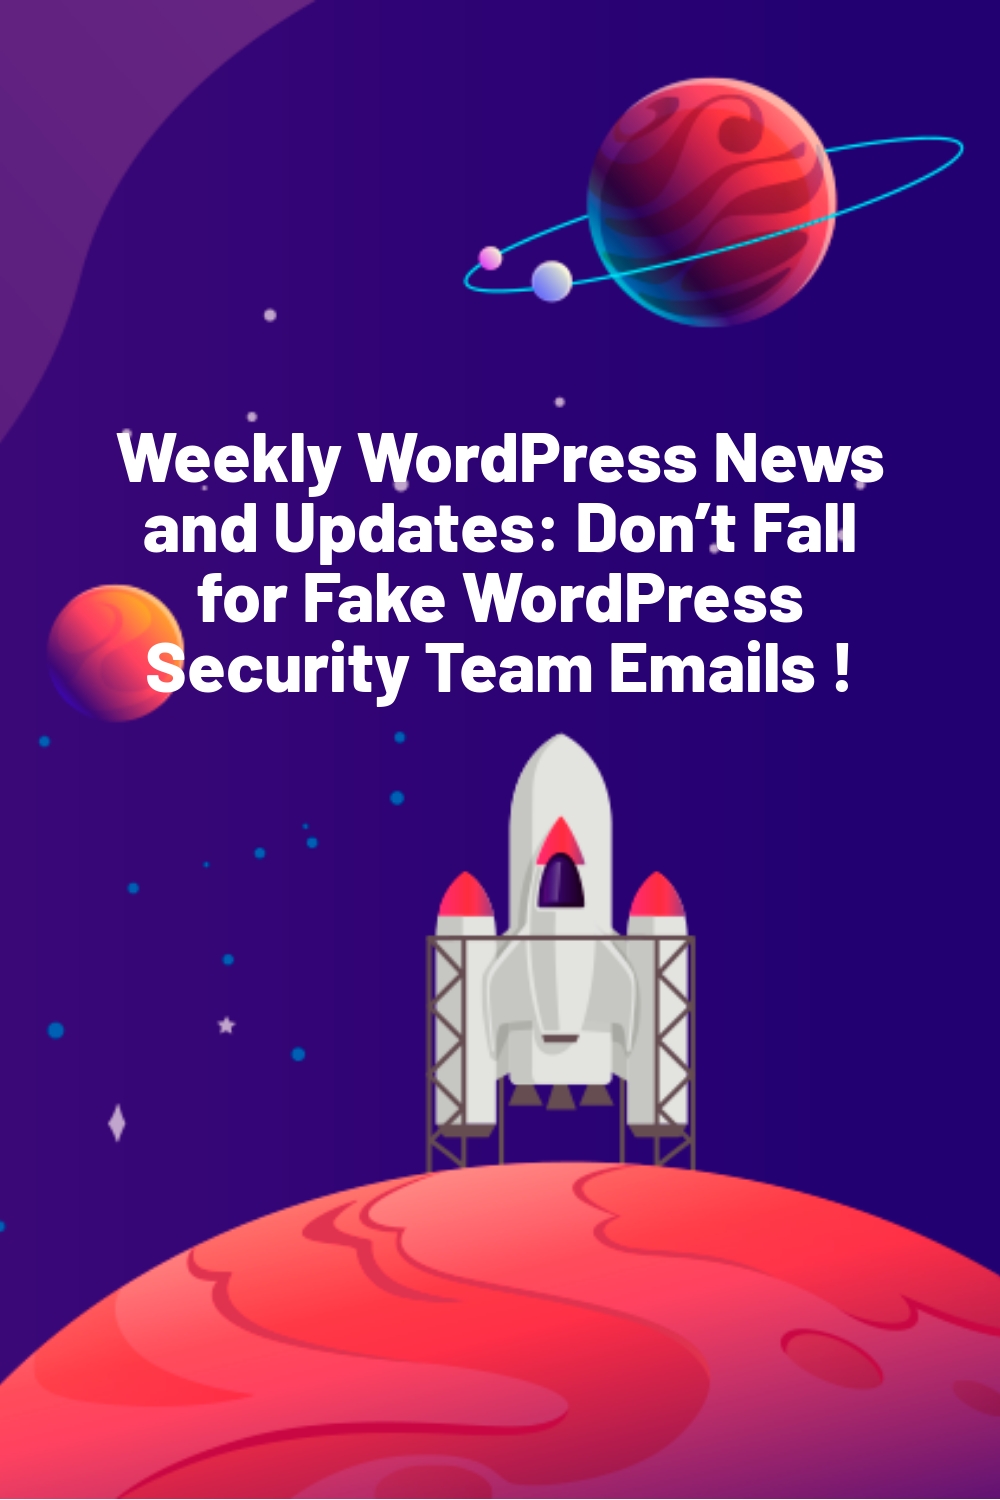 Weekly WordPress News and Updates: Don’t Fall for Fake WordPress Security Team Emails !